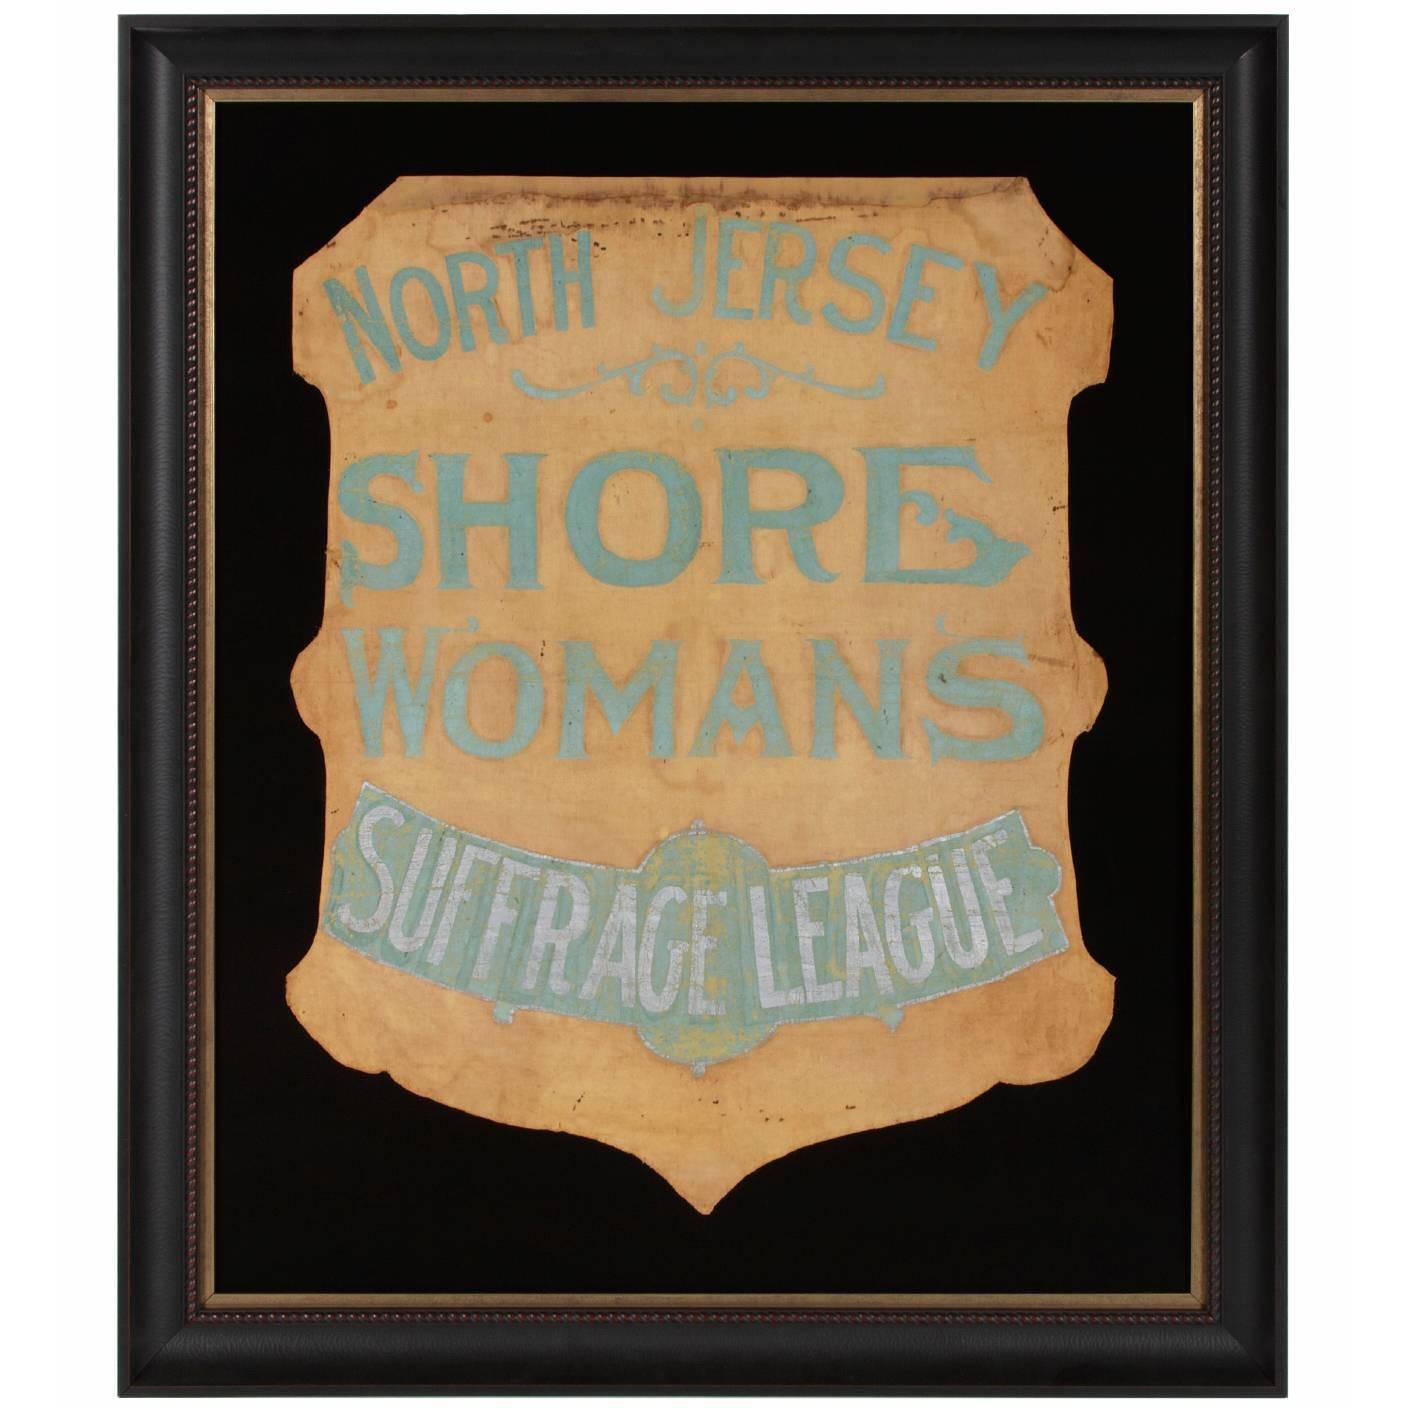 Shield-Shapped Banner from the North Jersey Shore Woman's Suffrage League